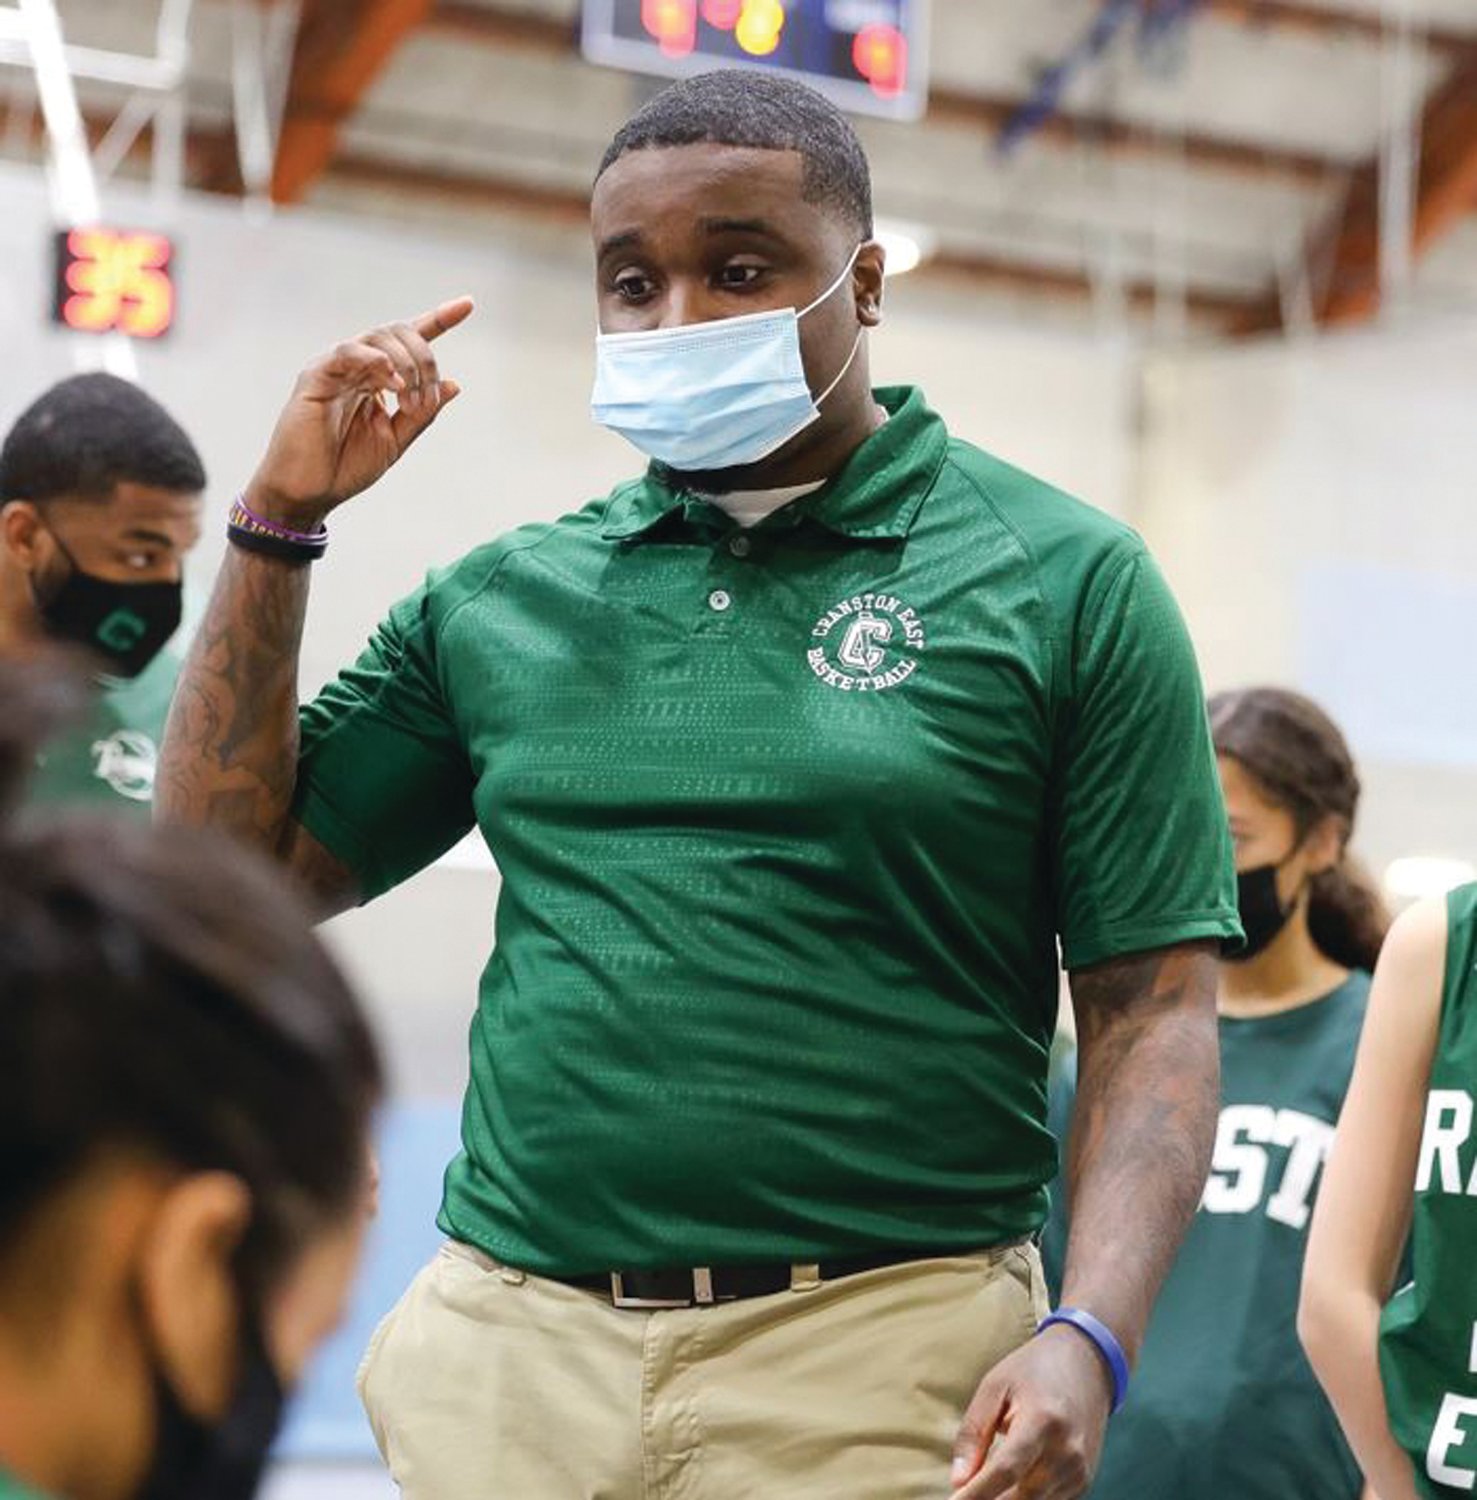 FAMILIAR FACE:
Cranston East girls
basketball coach
Jhamal Diggs, who is
set to take over the
school’s boys volleyball
program after the
passing of Meg McGonagle.